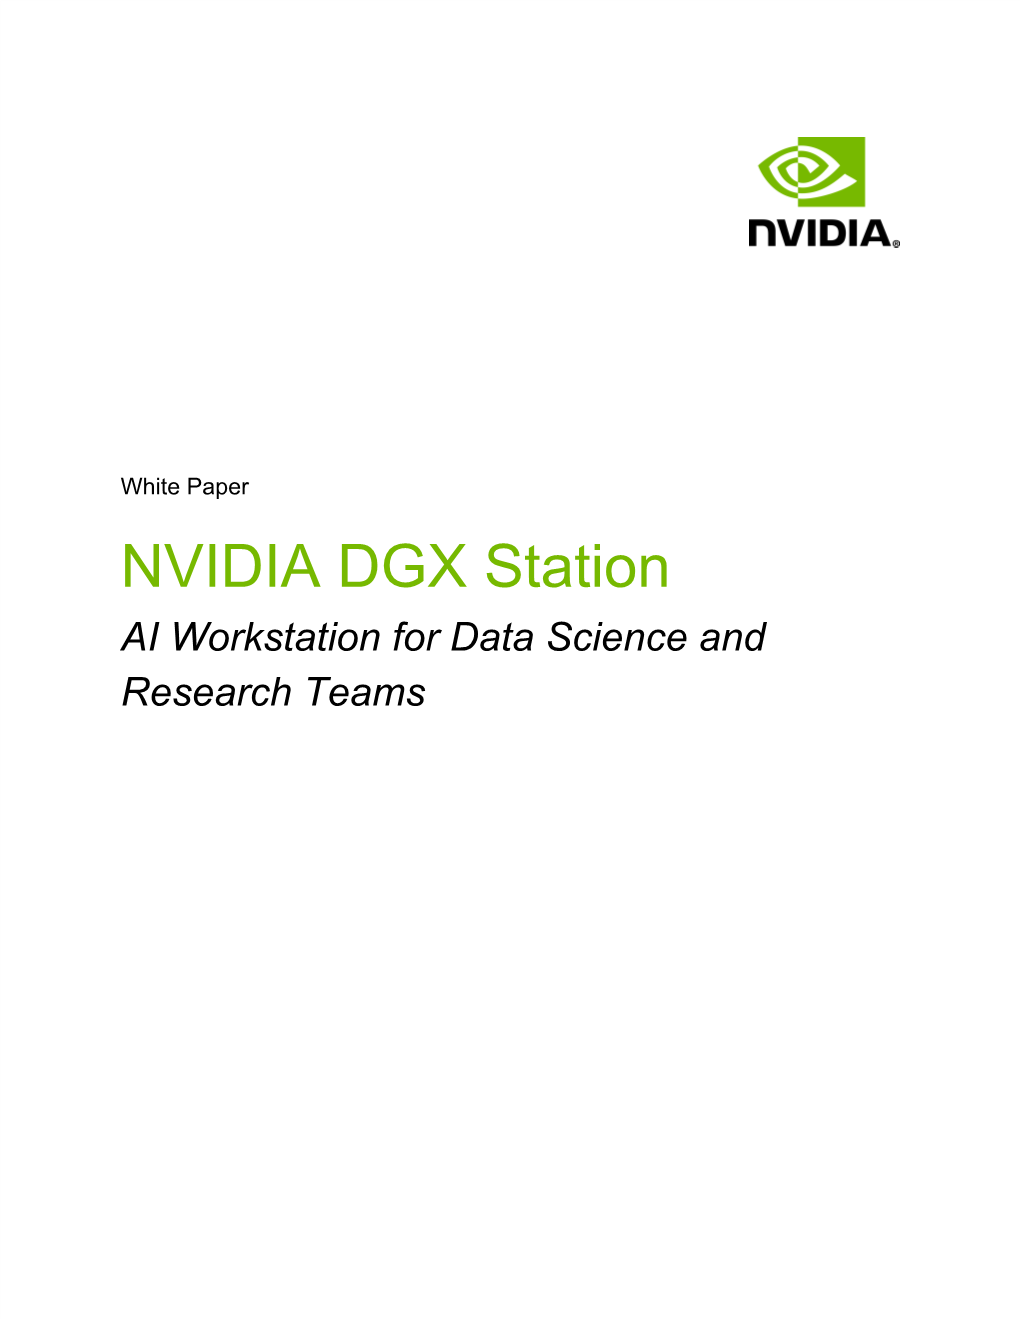 NVIDIA DGX Station AI Workstation for Data Science and Research Teams